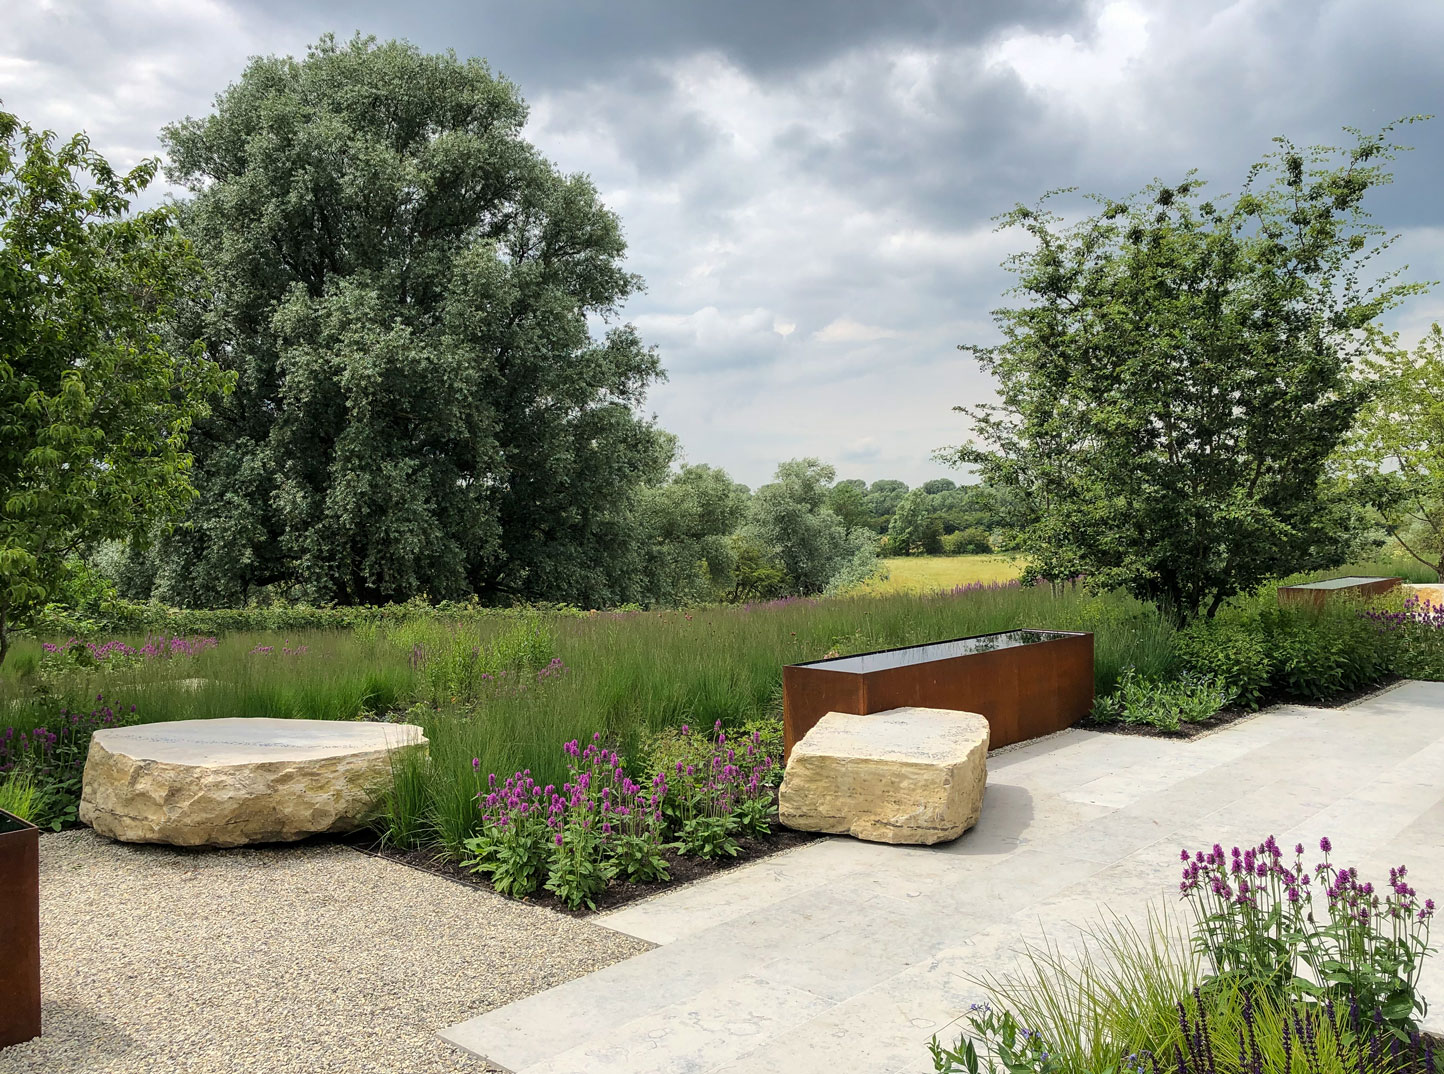 Cambridgeshire Garden design by Colm Joseph modern natural stone terrace and corten steel water feature and boulder seats with wildlife friendly planting and countryside views